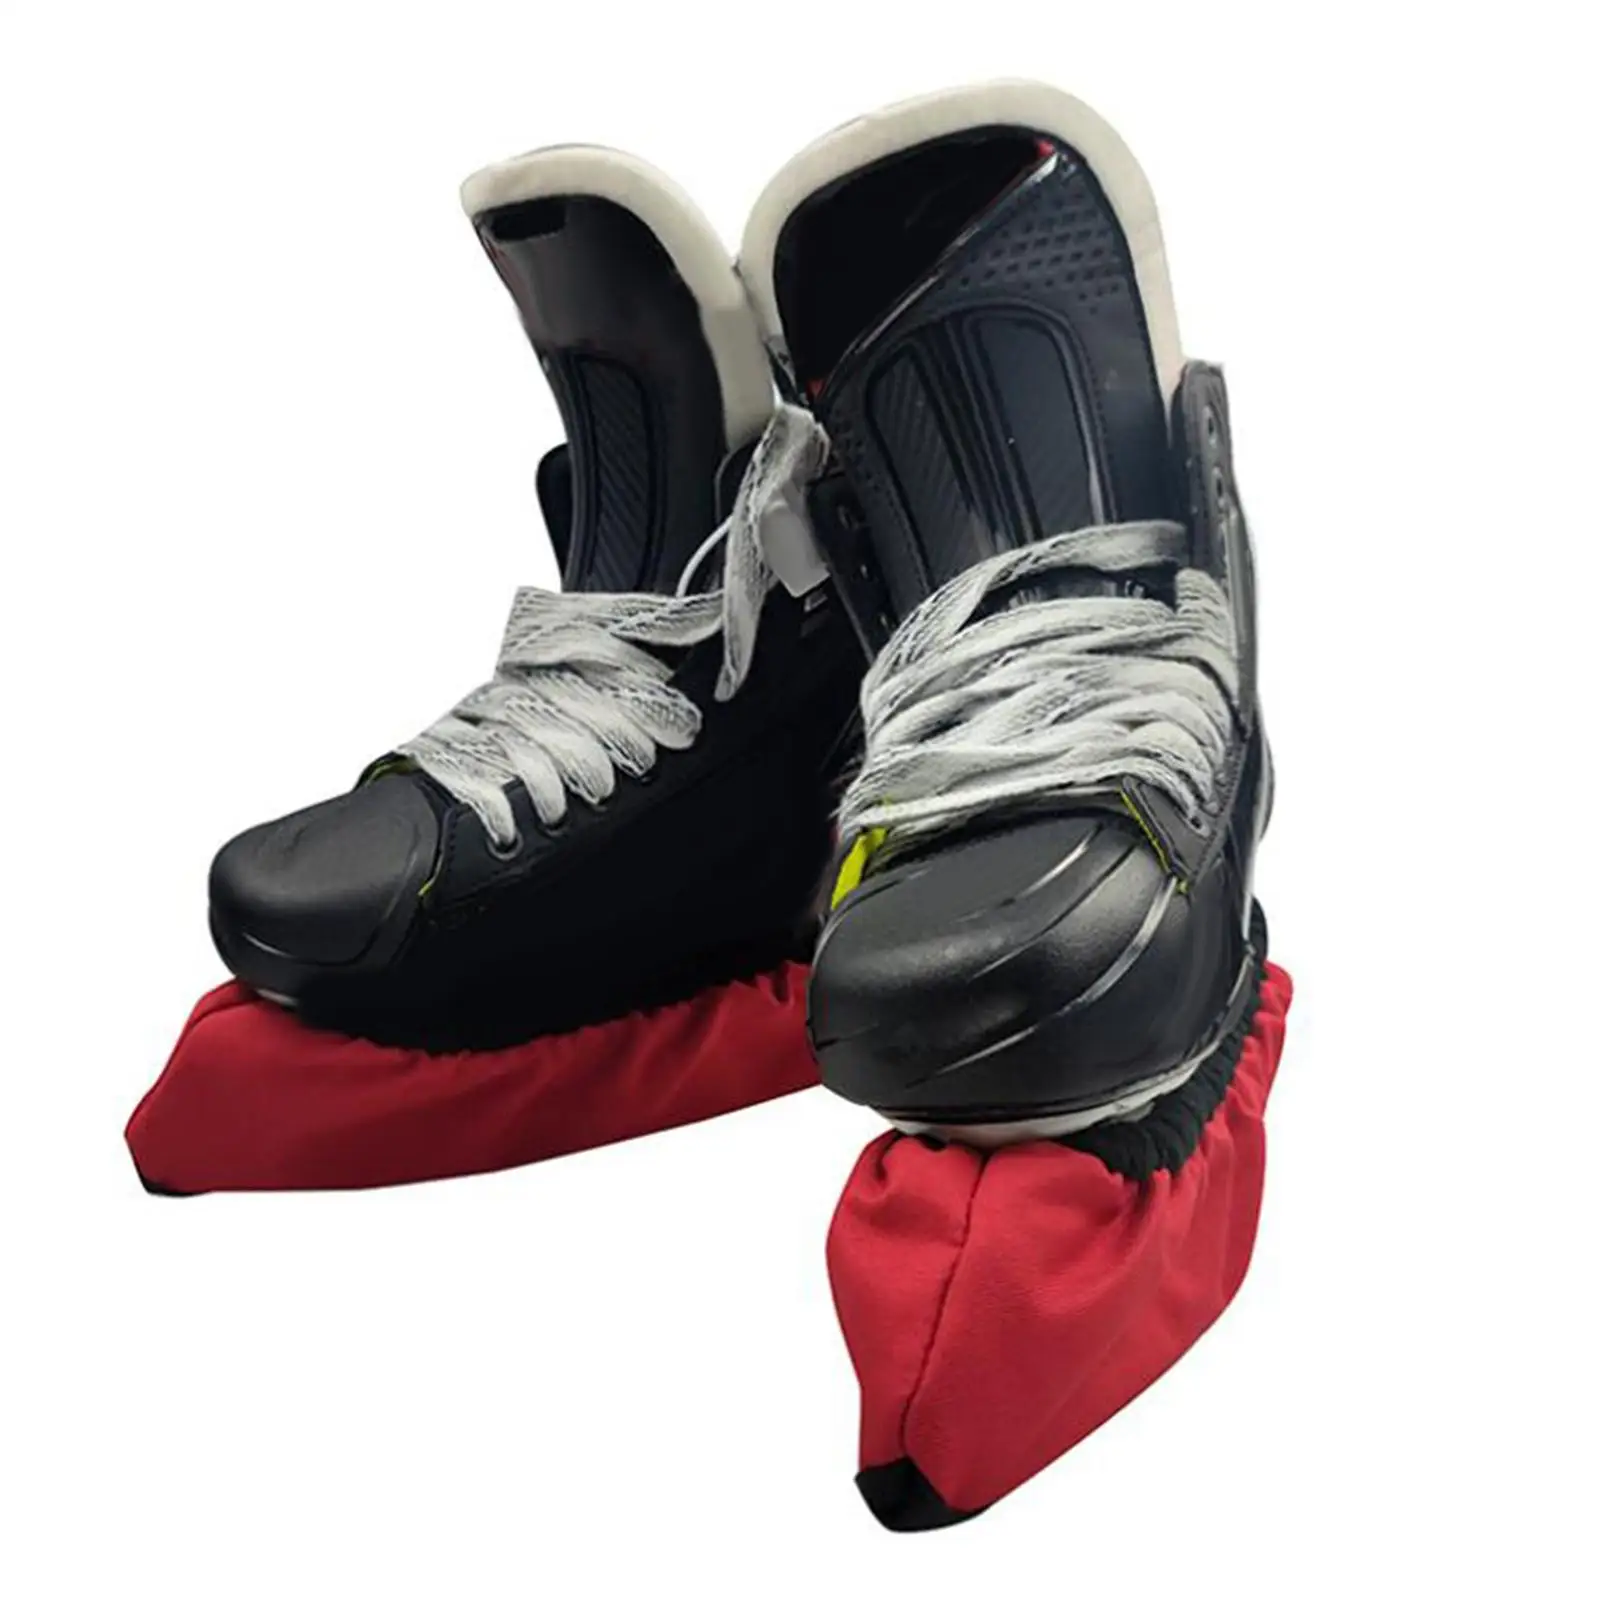 Ice Skate Blade Covers Protect Sleeve Hockey Shoes Skating Guard